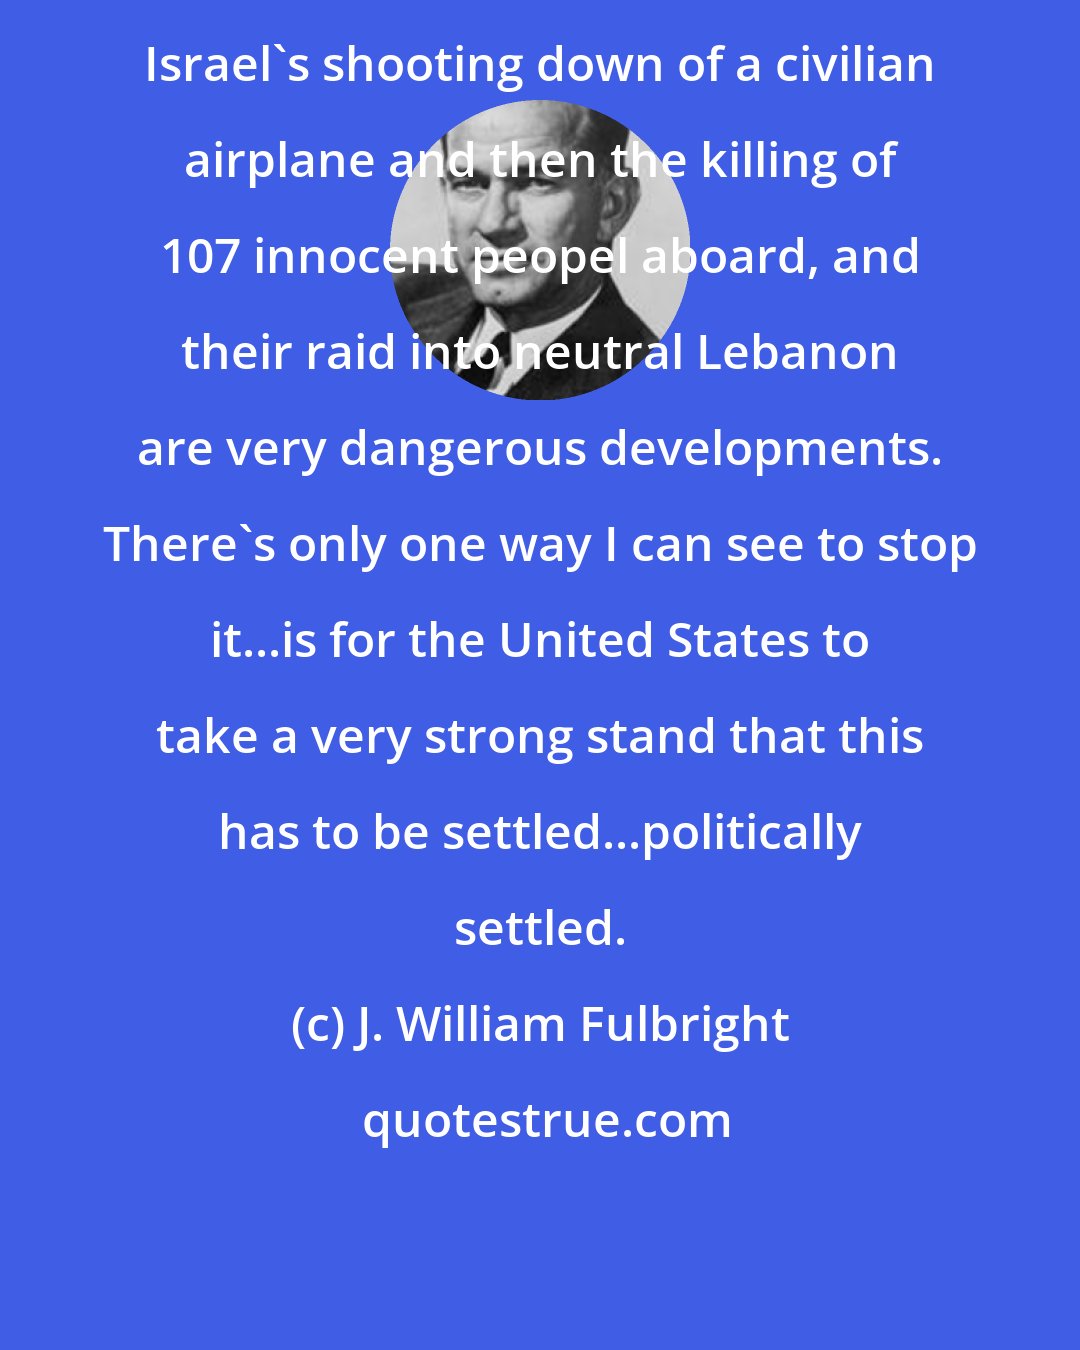 J. William Fulbright: Israel's shooting down of a civilian airplane and then the killing of 107 innocent peopel aboard, and their raid into neutral Lebanon are very dangerous developments. There's only one way I can see to stop it...is for the United States to take a very strong stand that this has to be settled...politically settled.